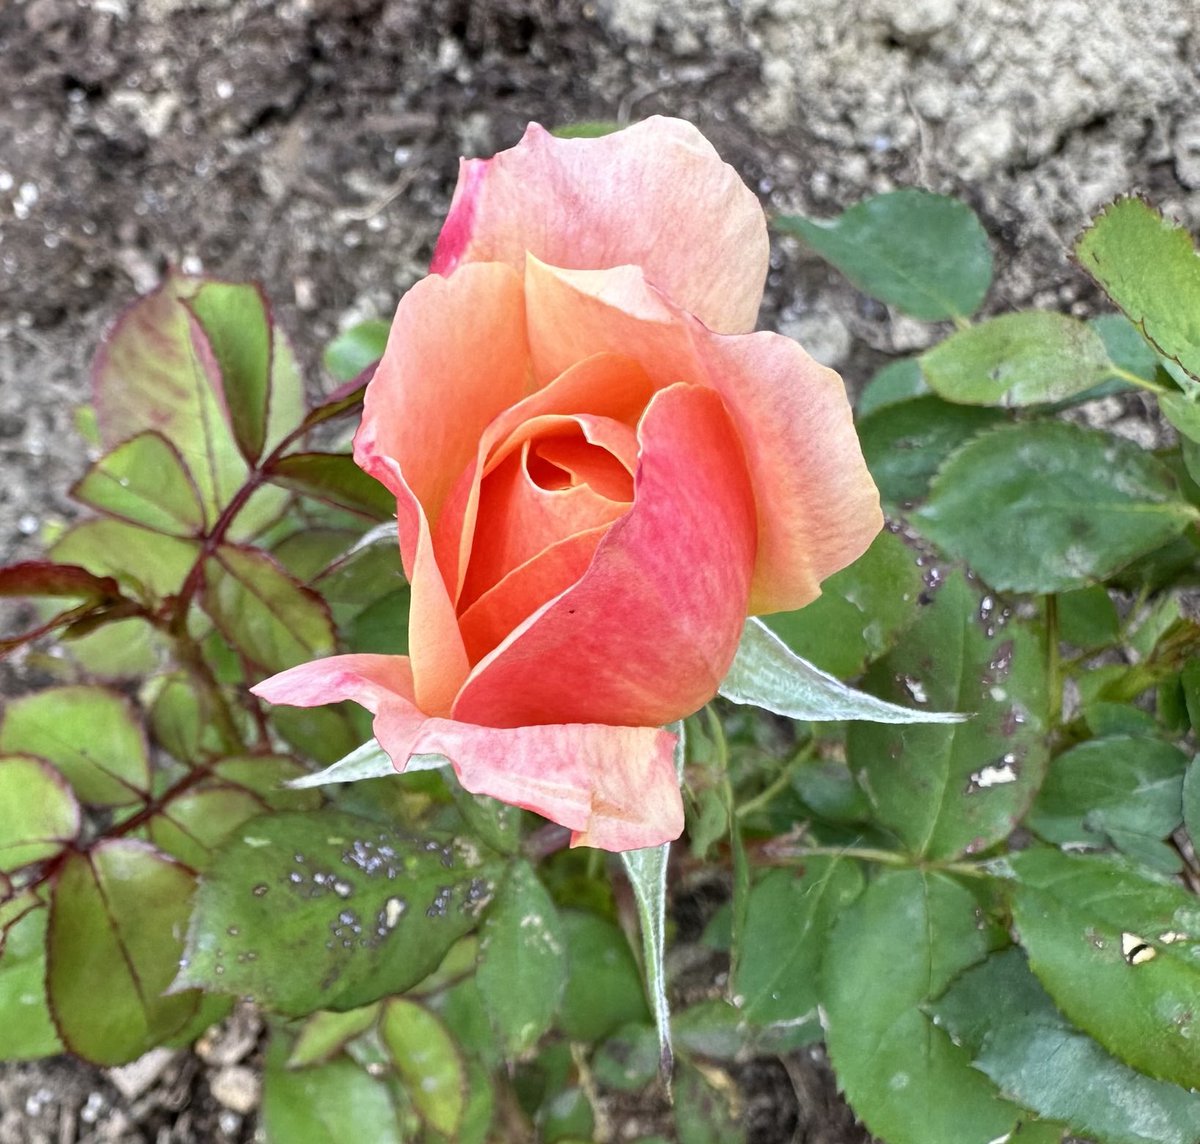 Our first rose of the season #rosewednesday